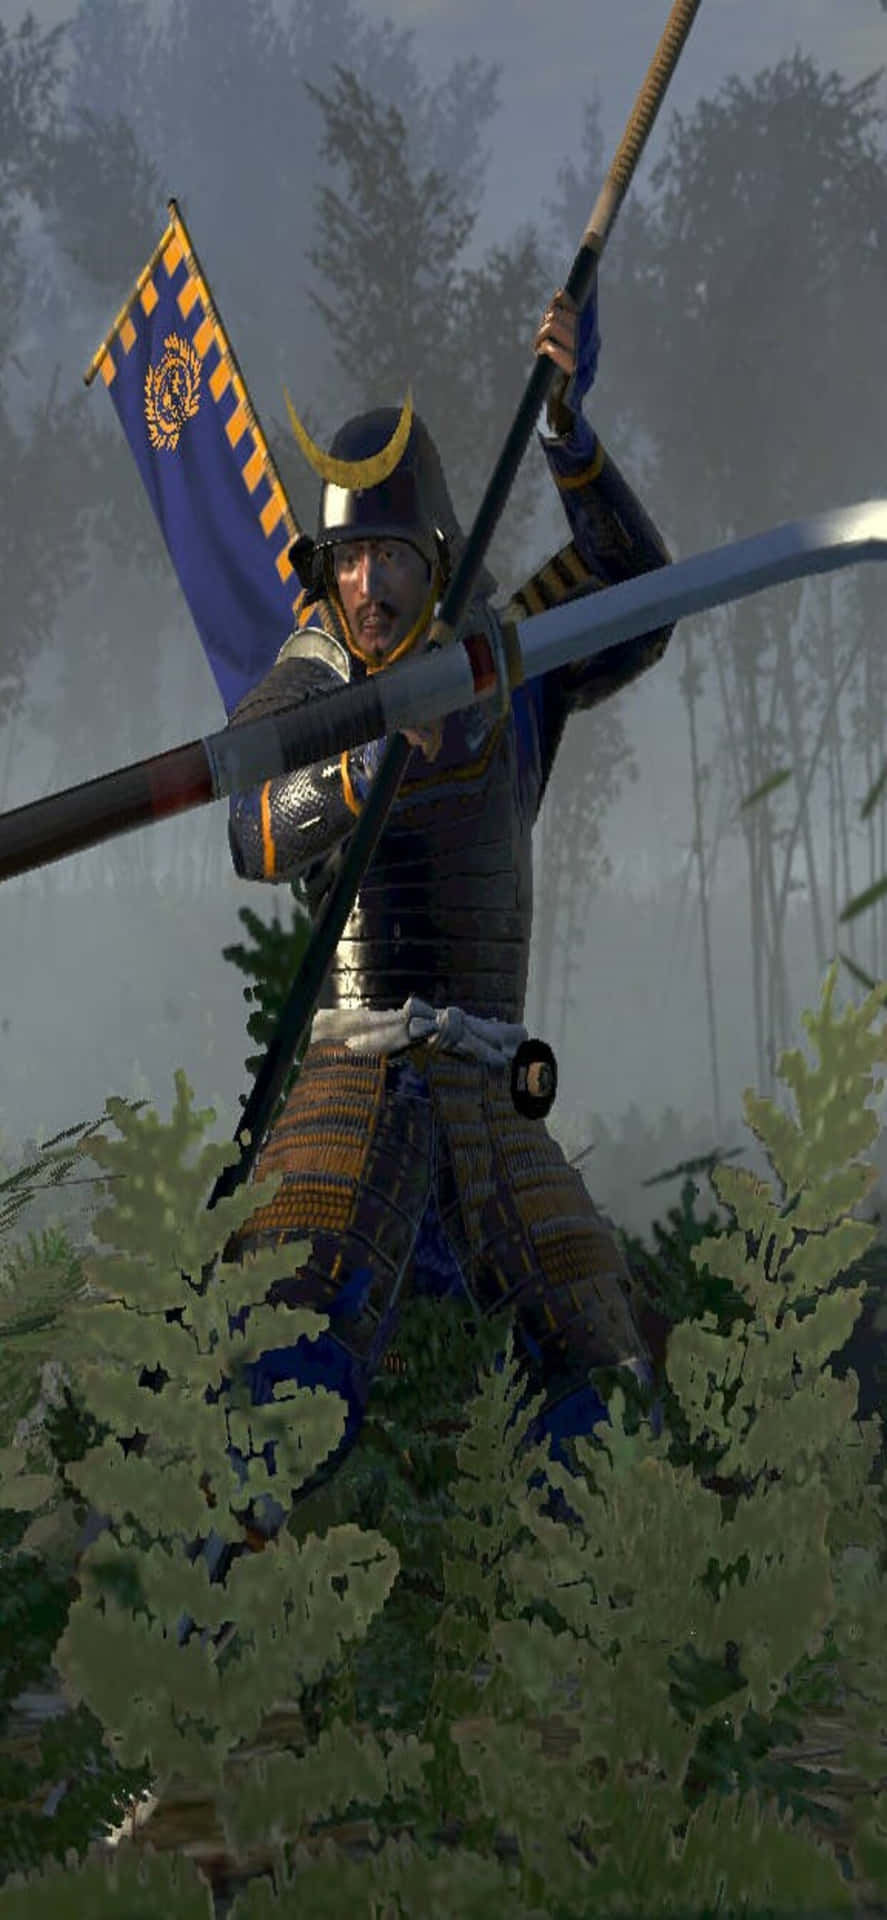 A Samurai Is Holding A Sword In The Forest